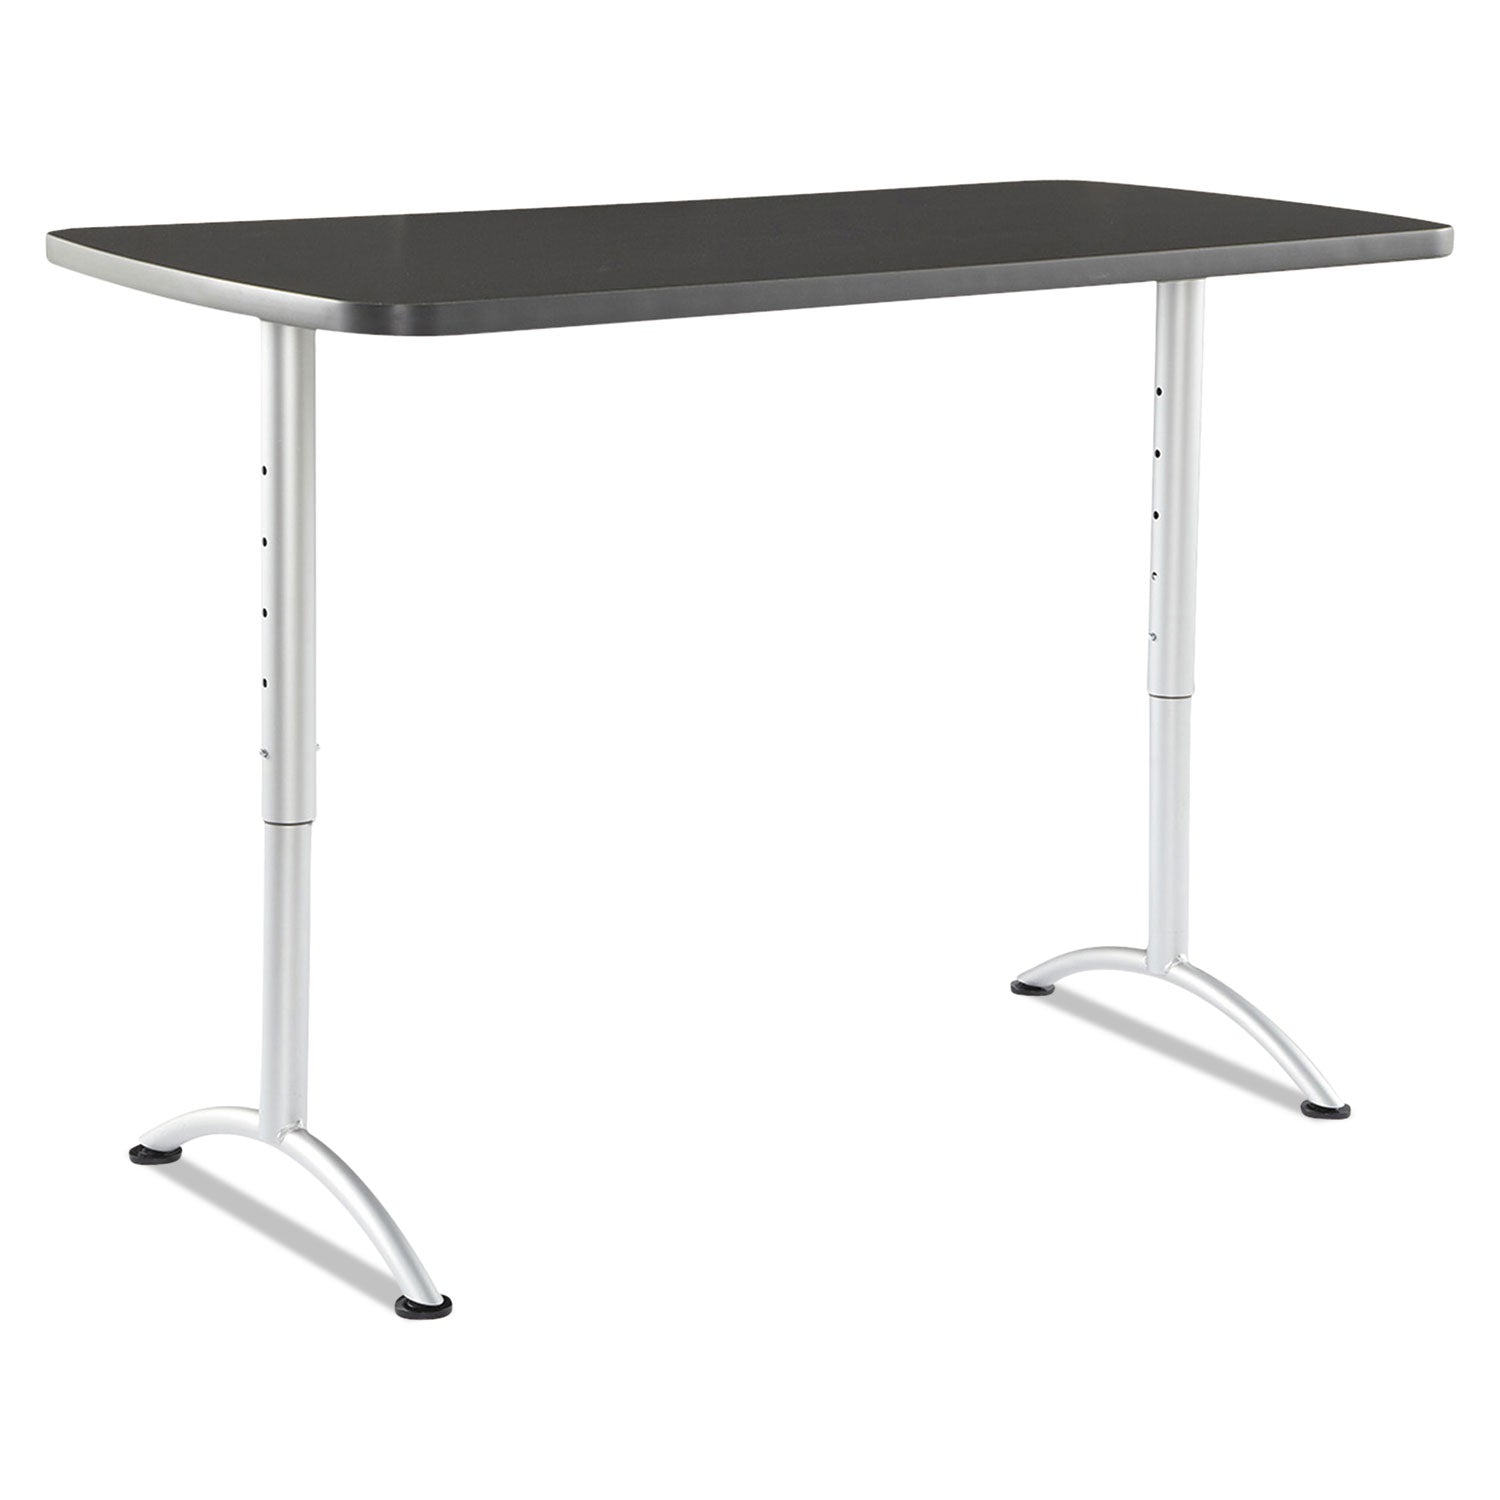 ARC Adjustable-Height Table, Rectangular, 60" x 30" x 30" to 42", Graphite/Silver - 